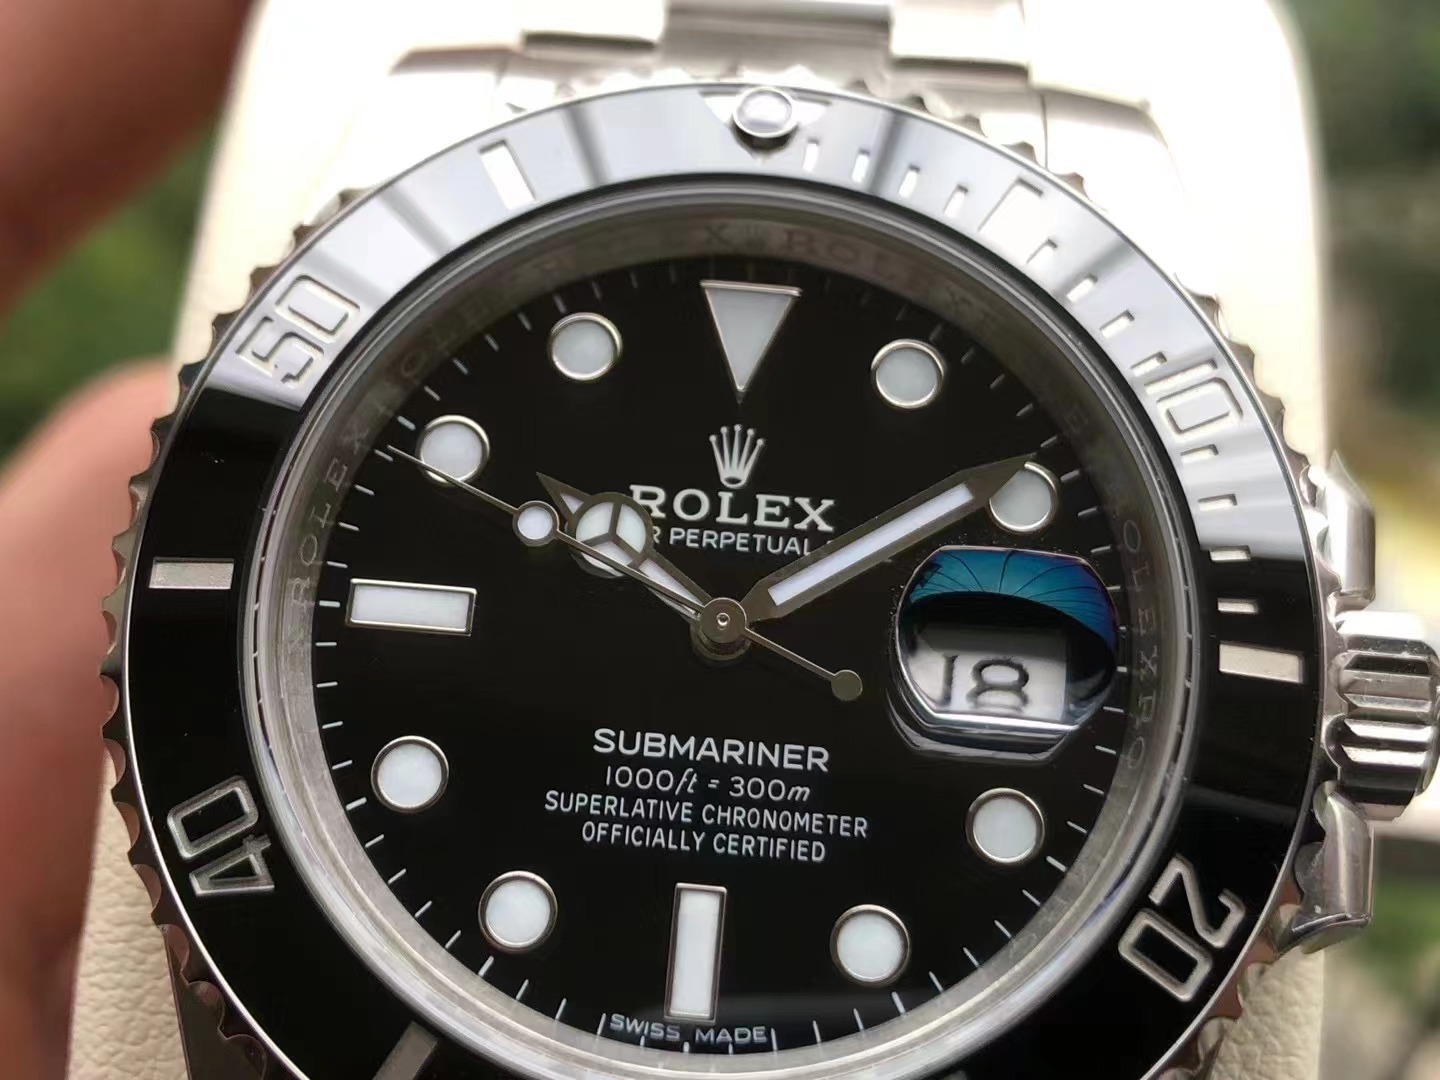 Rolex Submariner Date 116610 LV SS 904L Green Dial Swiss 3135 NEW VSF